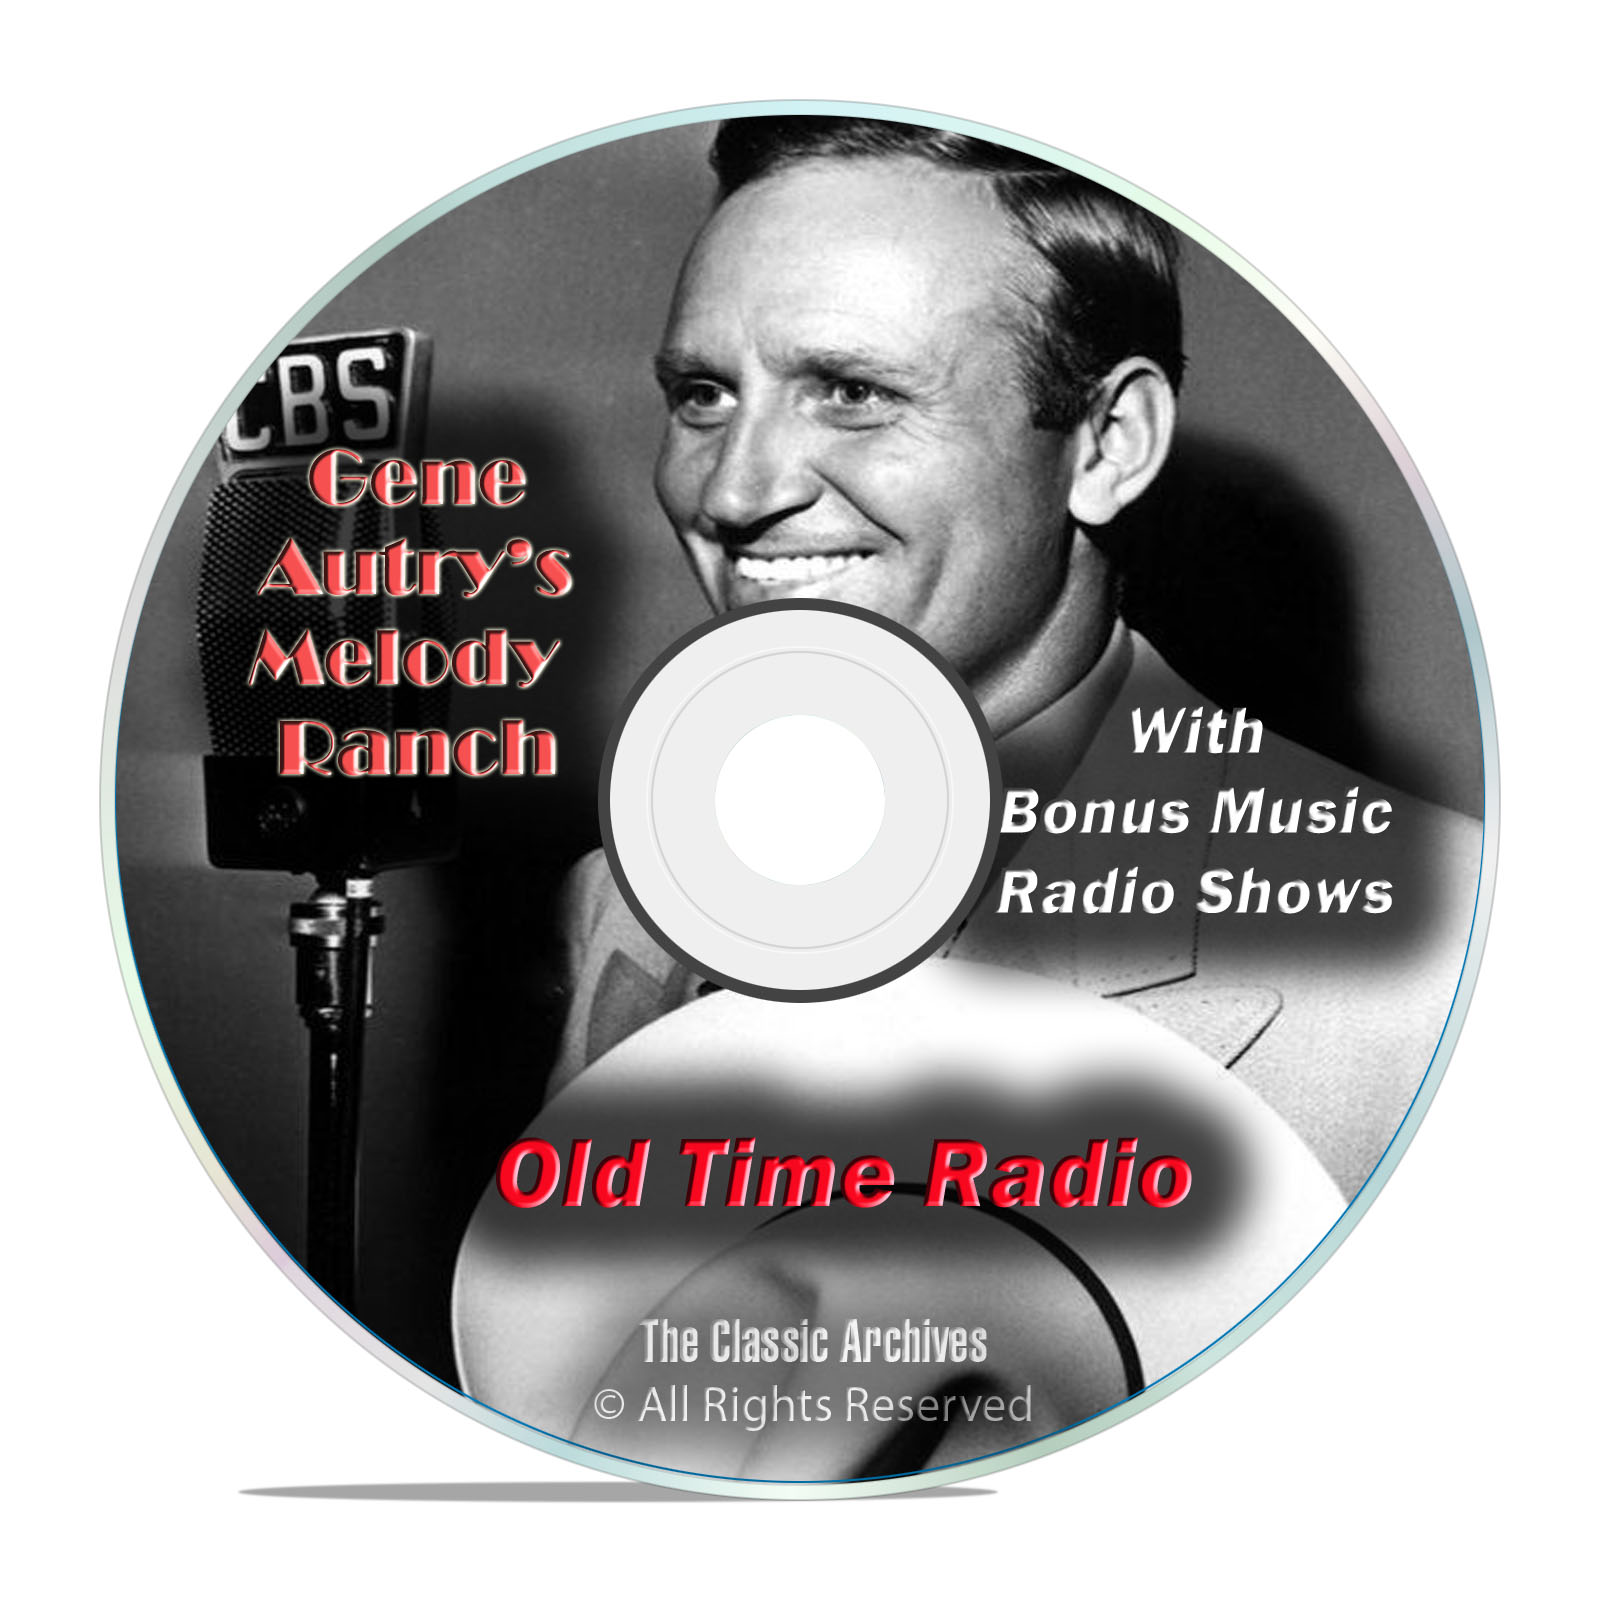 Gene Autry's Melody Ranch, 422 Old Time Radio Music Shows, OTR mp3 DVD